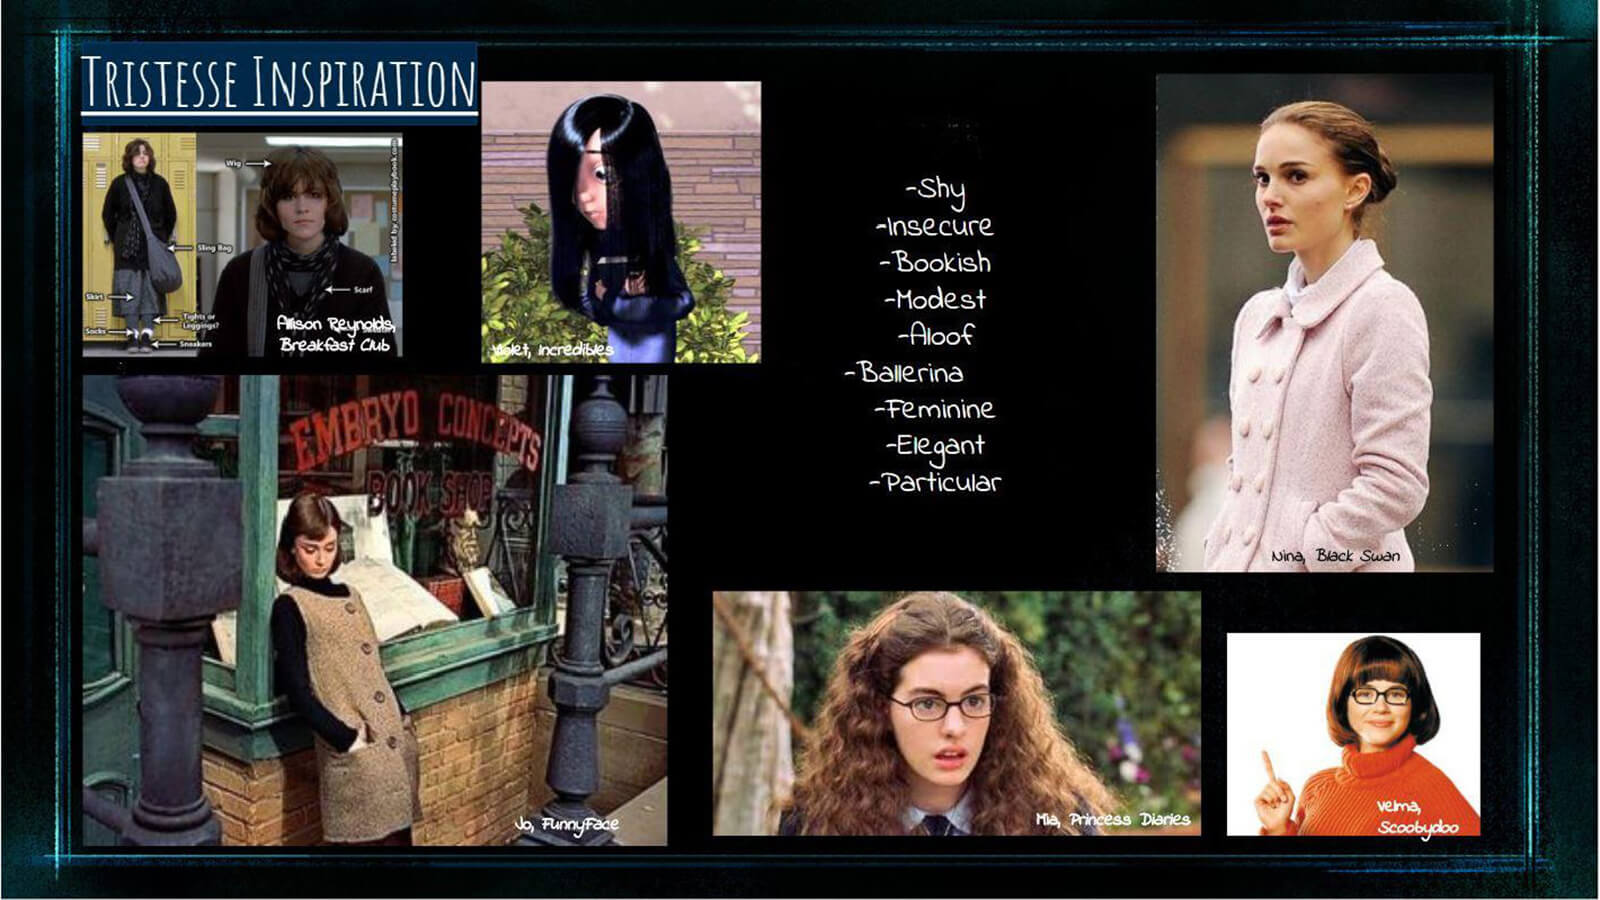 A slide titled "Tristesse Inspiration," showing photos of popular film characters the team referenced in designing the protagonist of Etude's look and feel.